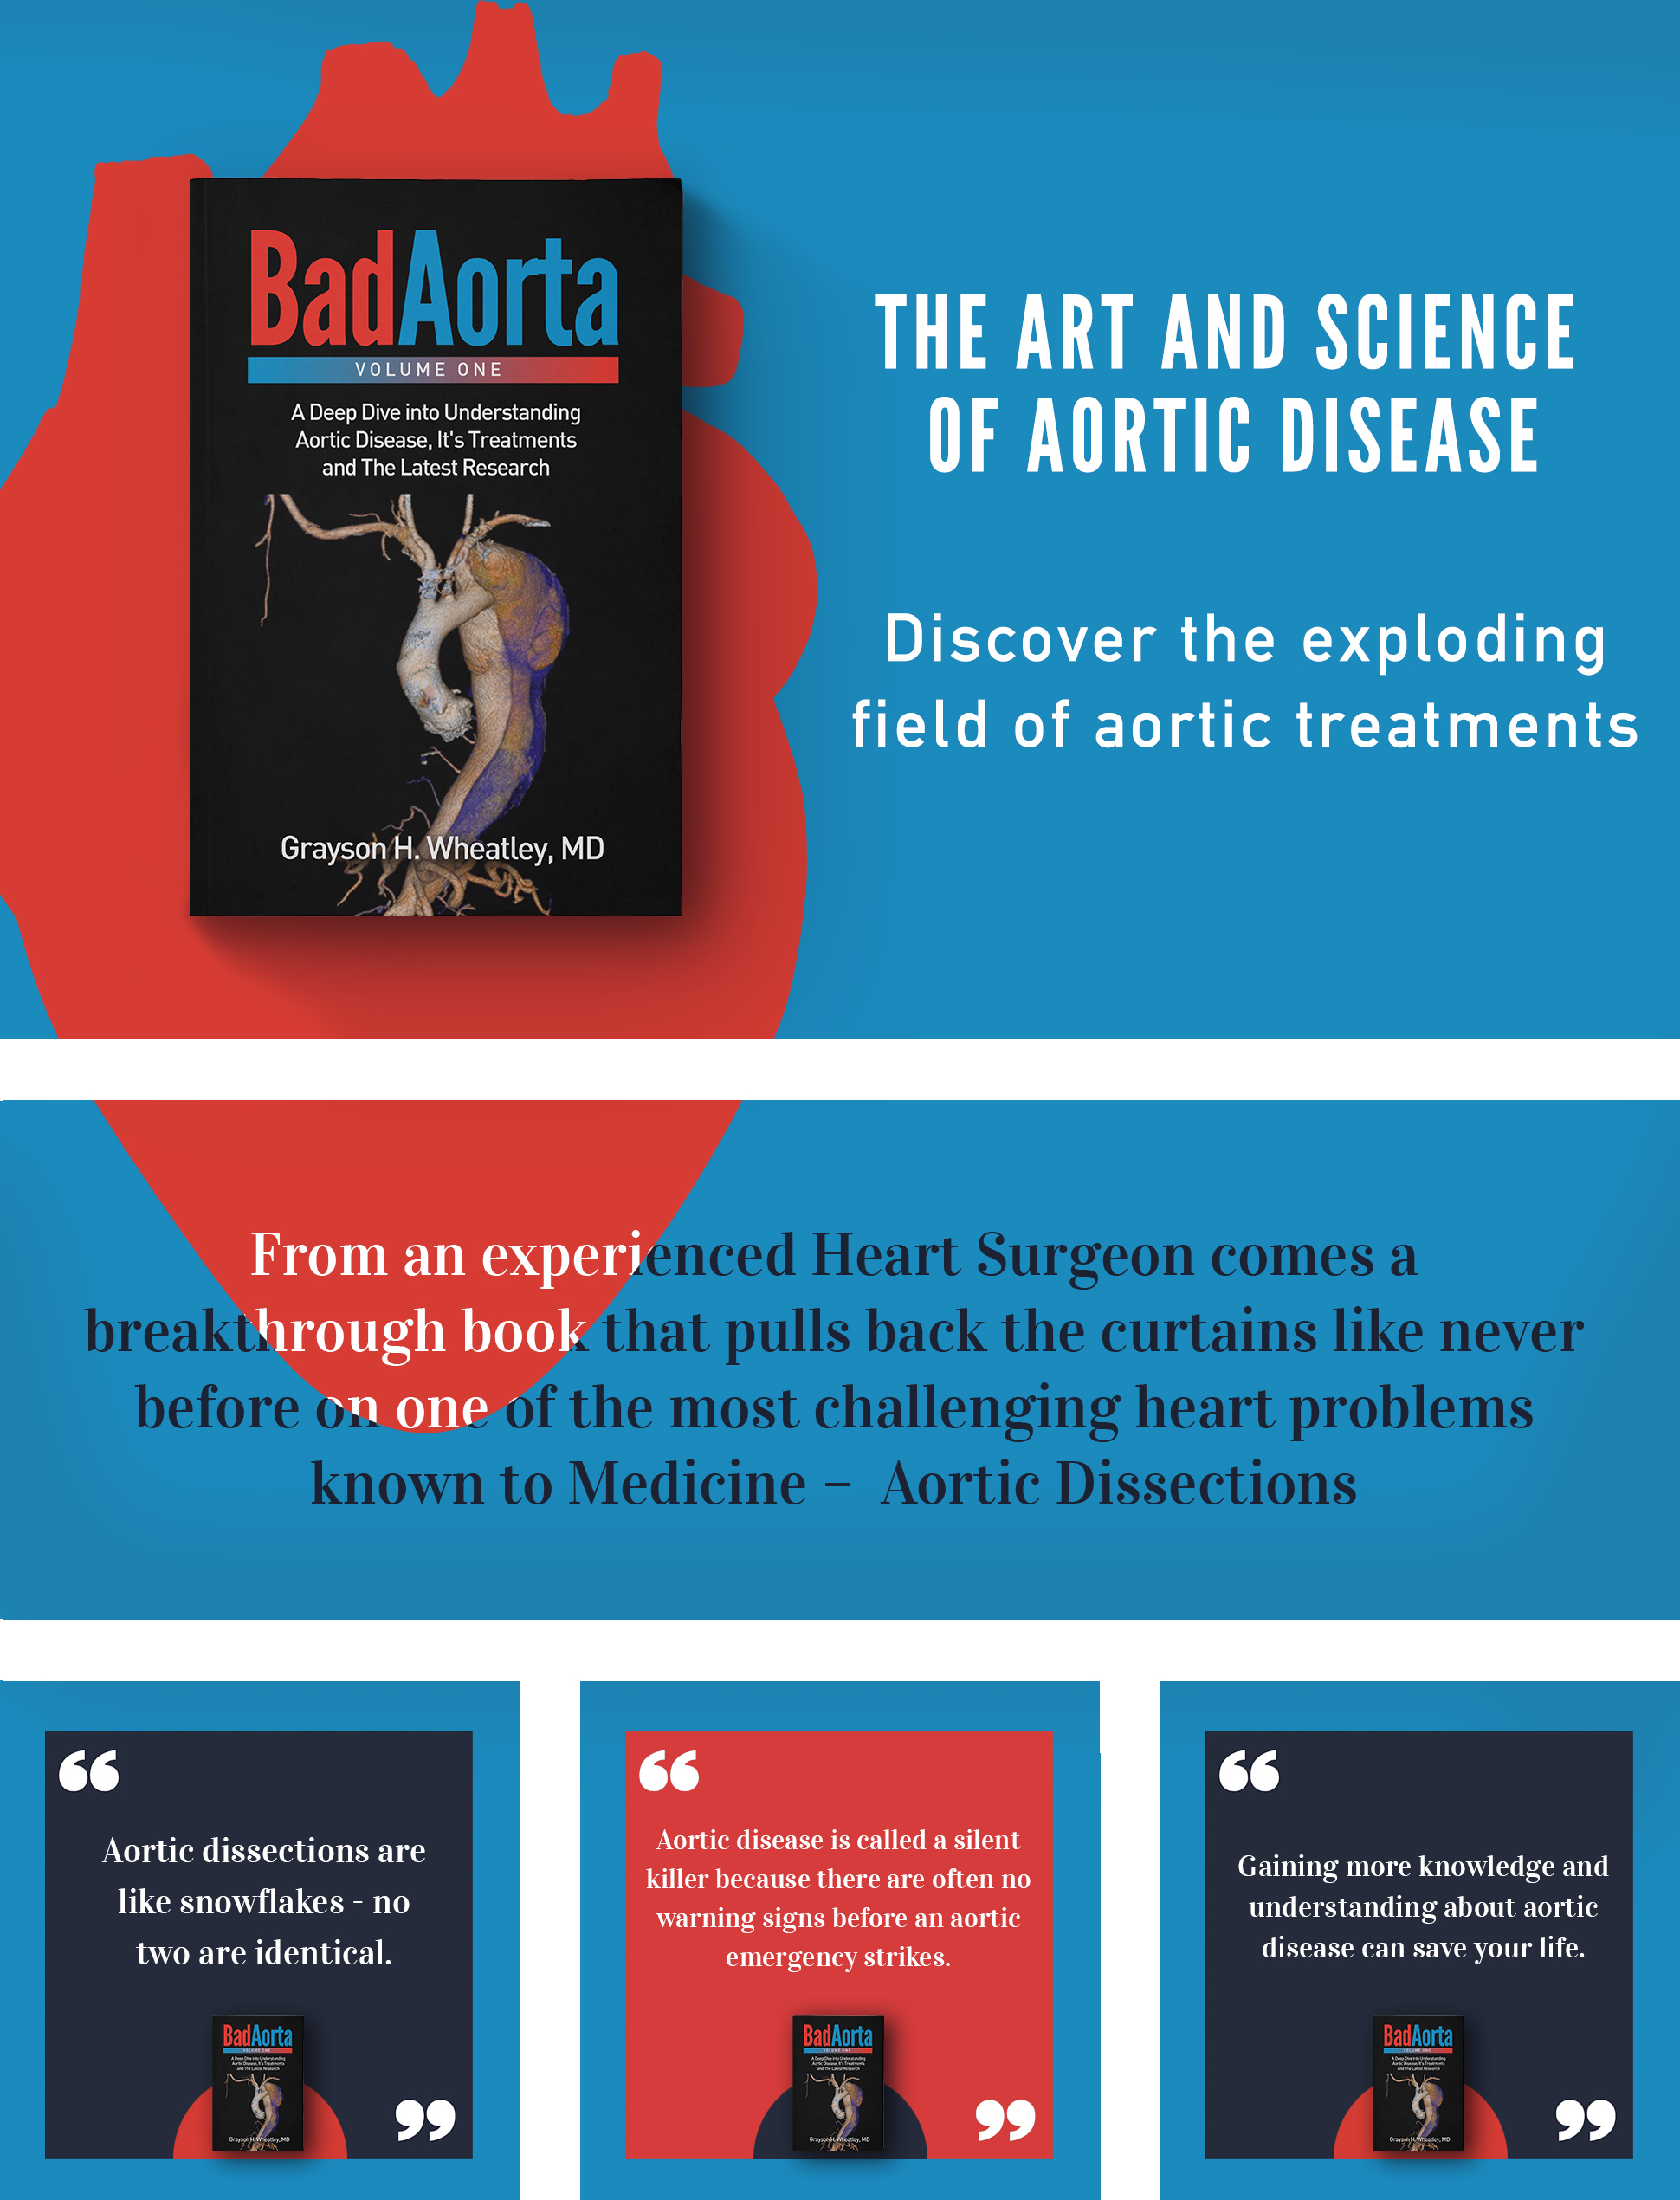 BadAorta: A Deep Dive Into Aortic Disease, It's Treatment And The Latest Research: Volume One: Aortic Dissections